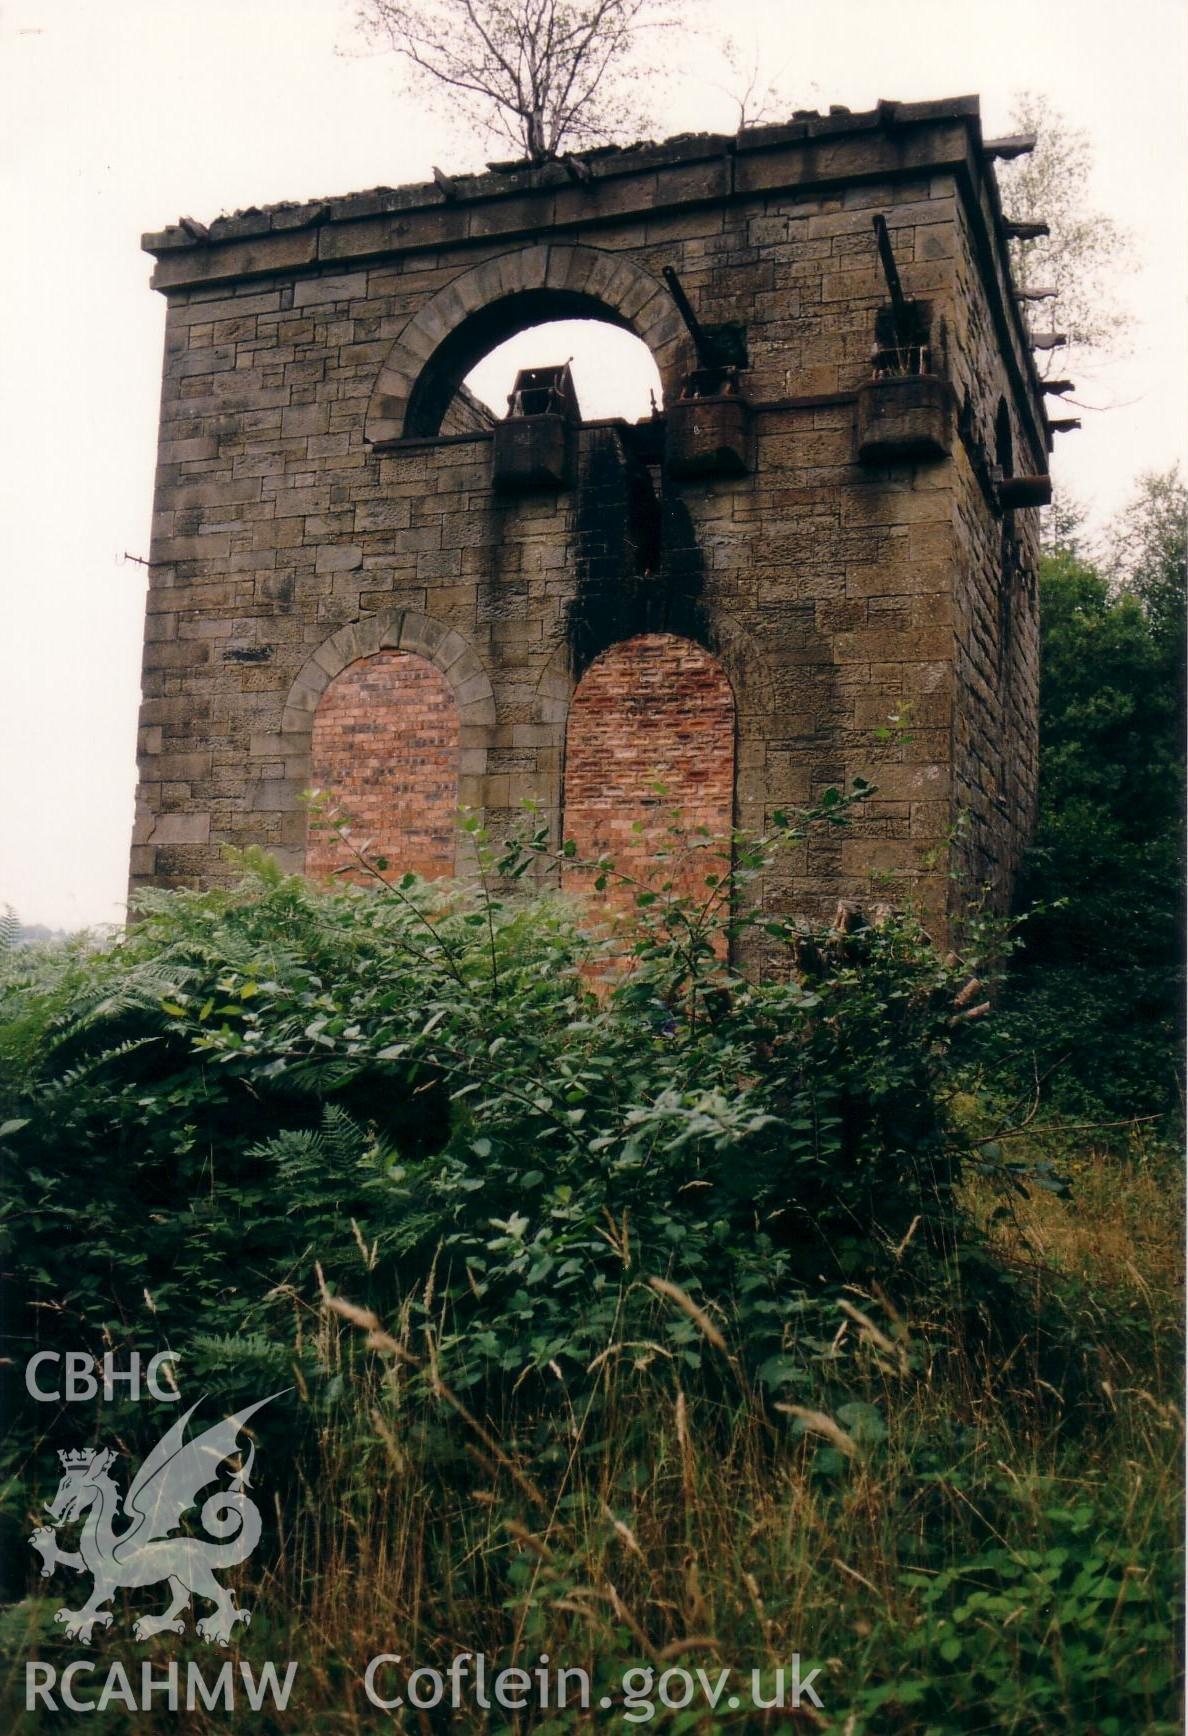 Glyn Pits 1859-65 vertical engine house showing bricked-up doorways.